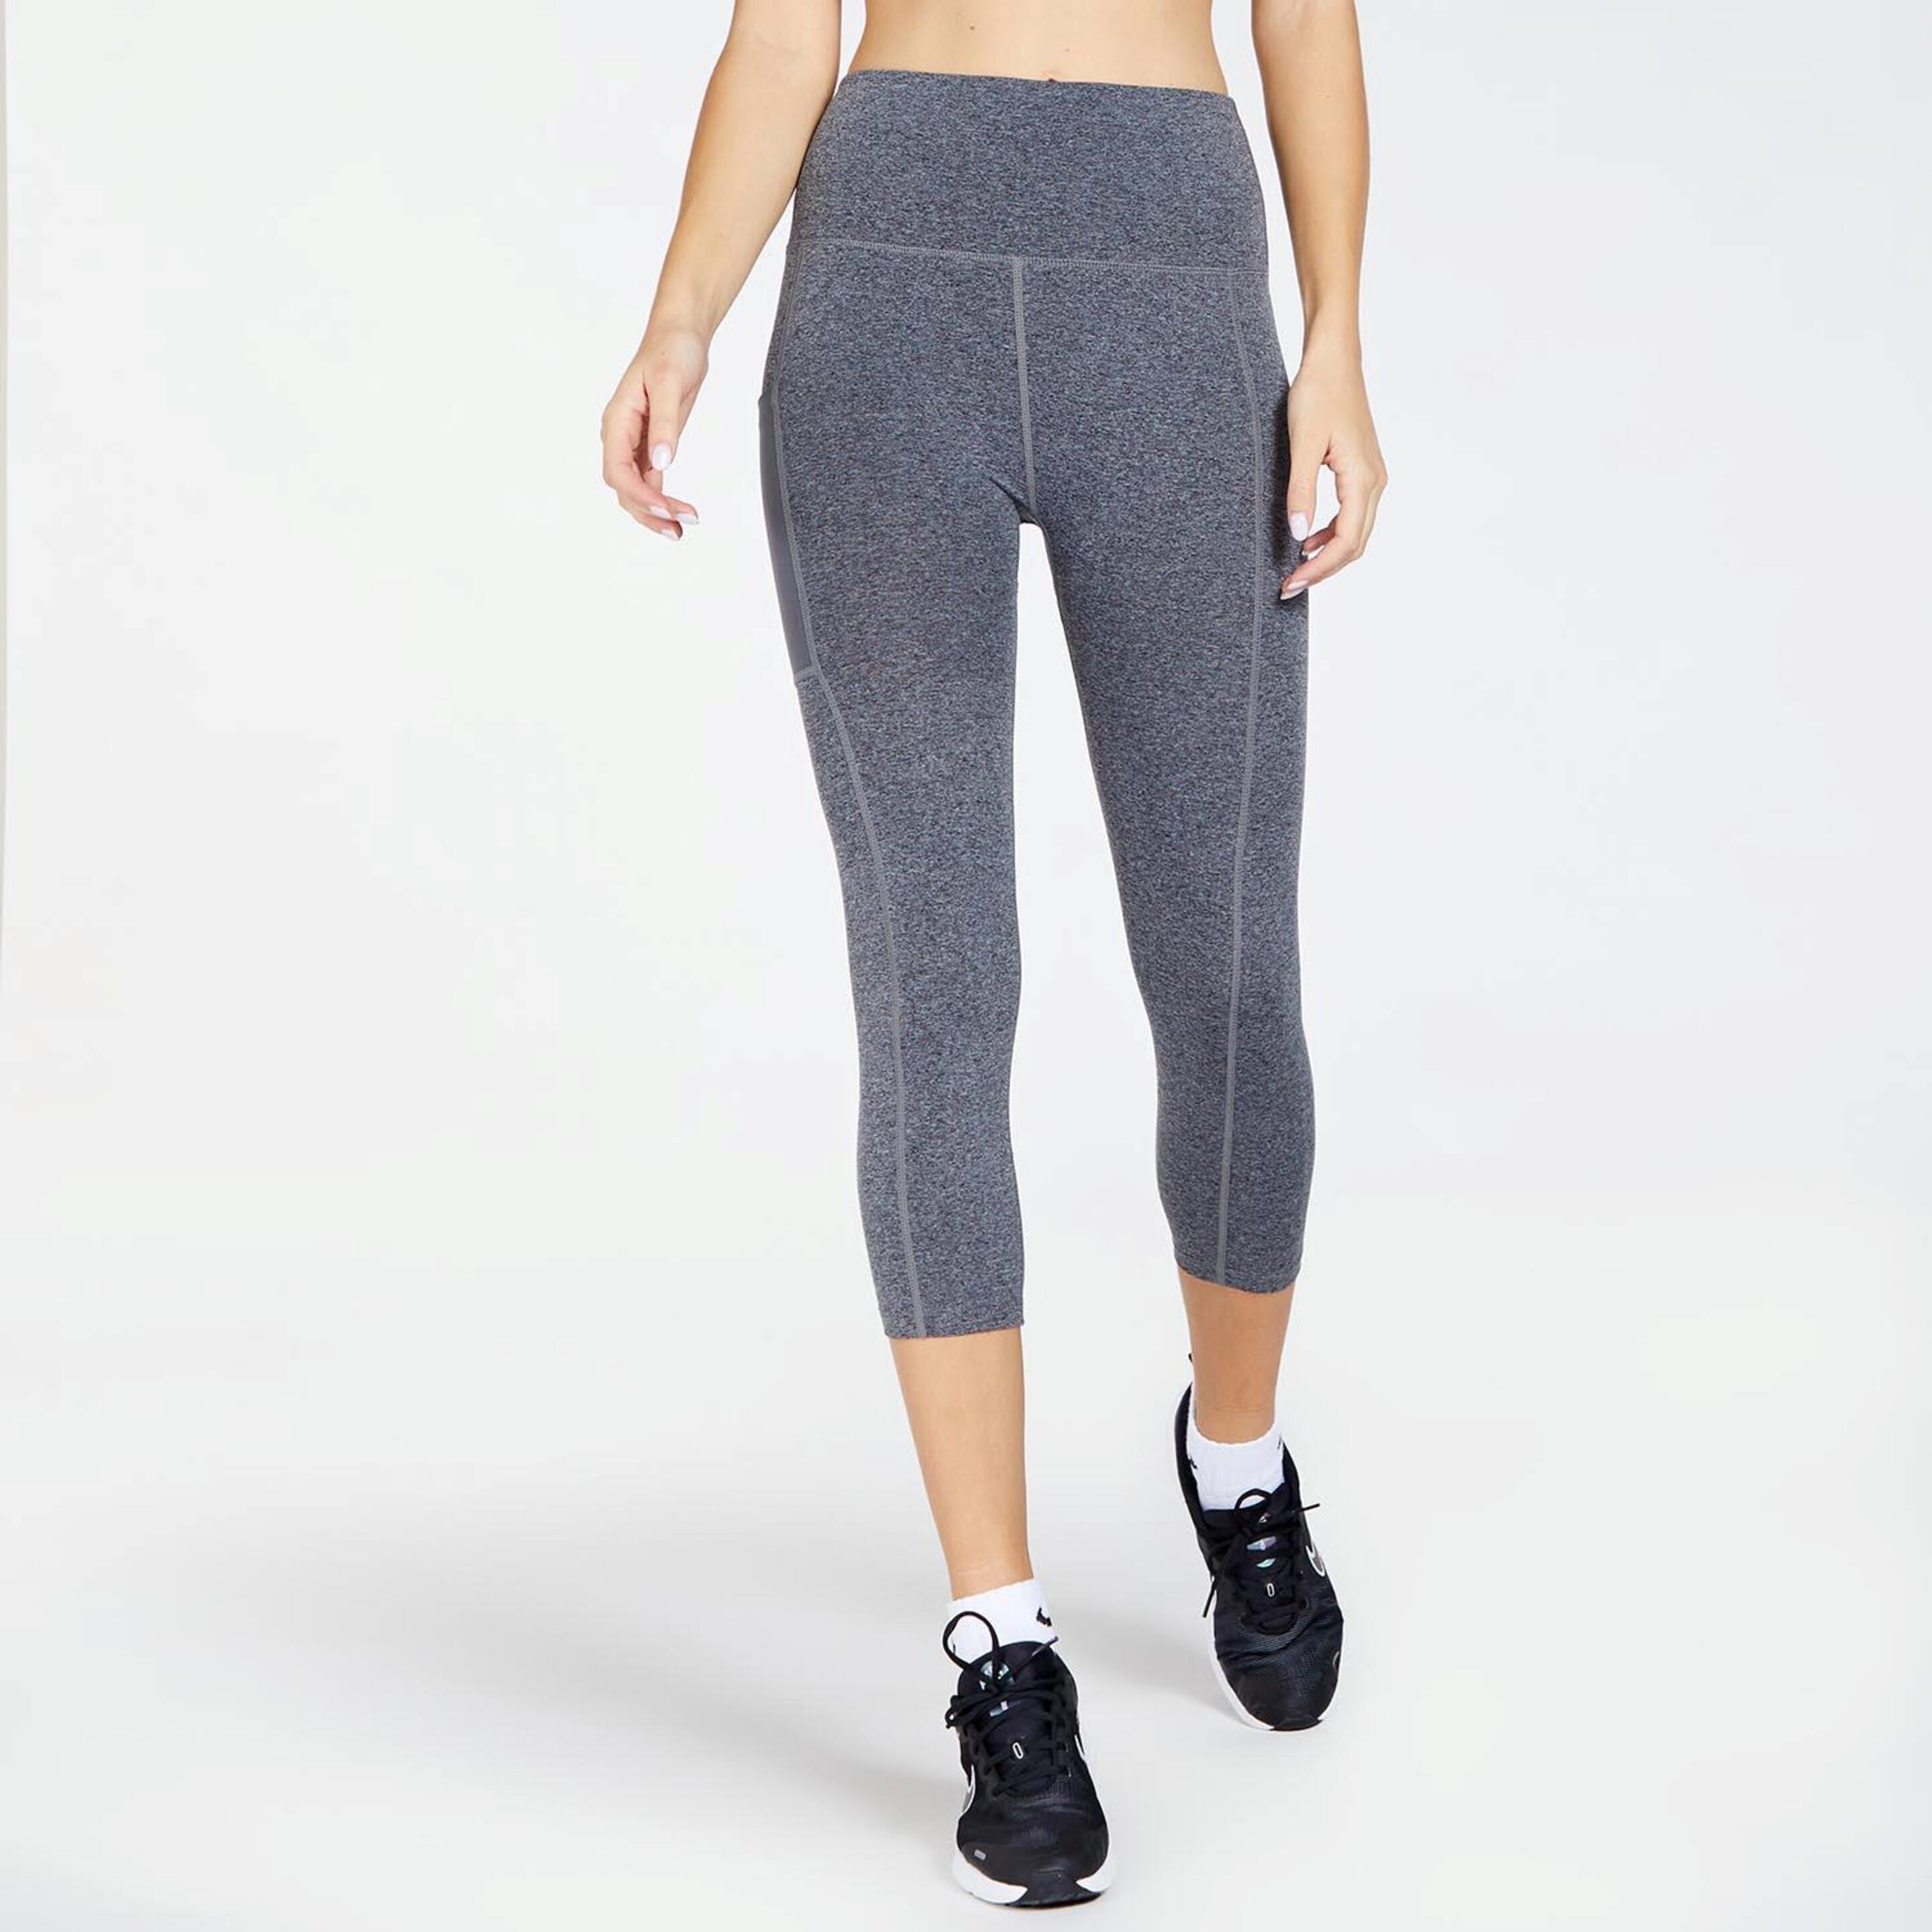 Doone Supportive - gris - Mallas Fitness Mujer